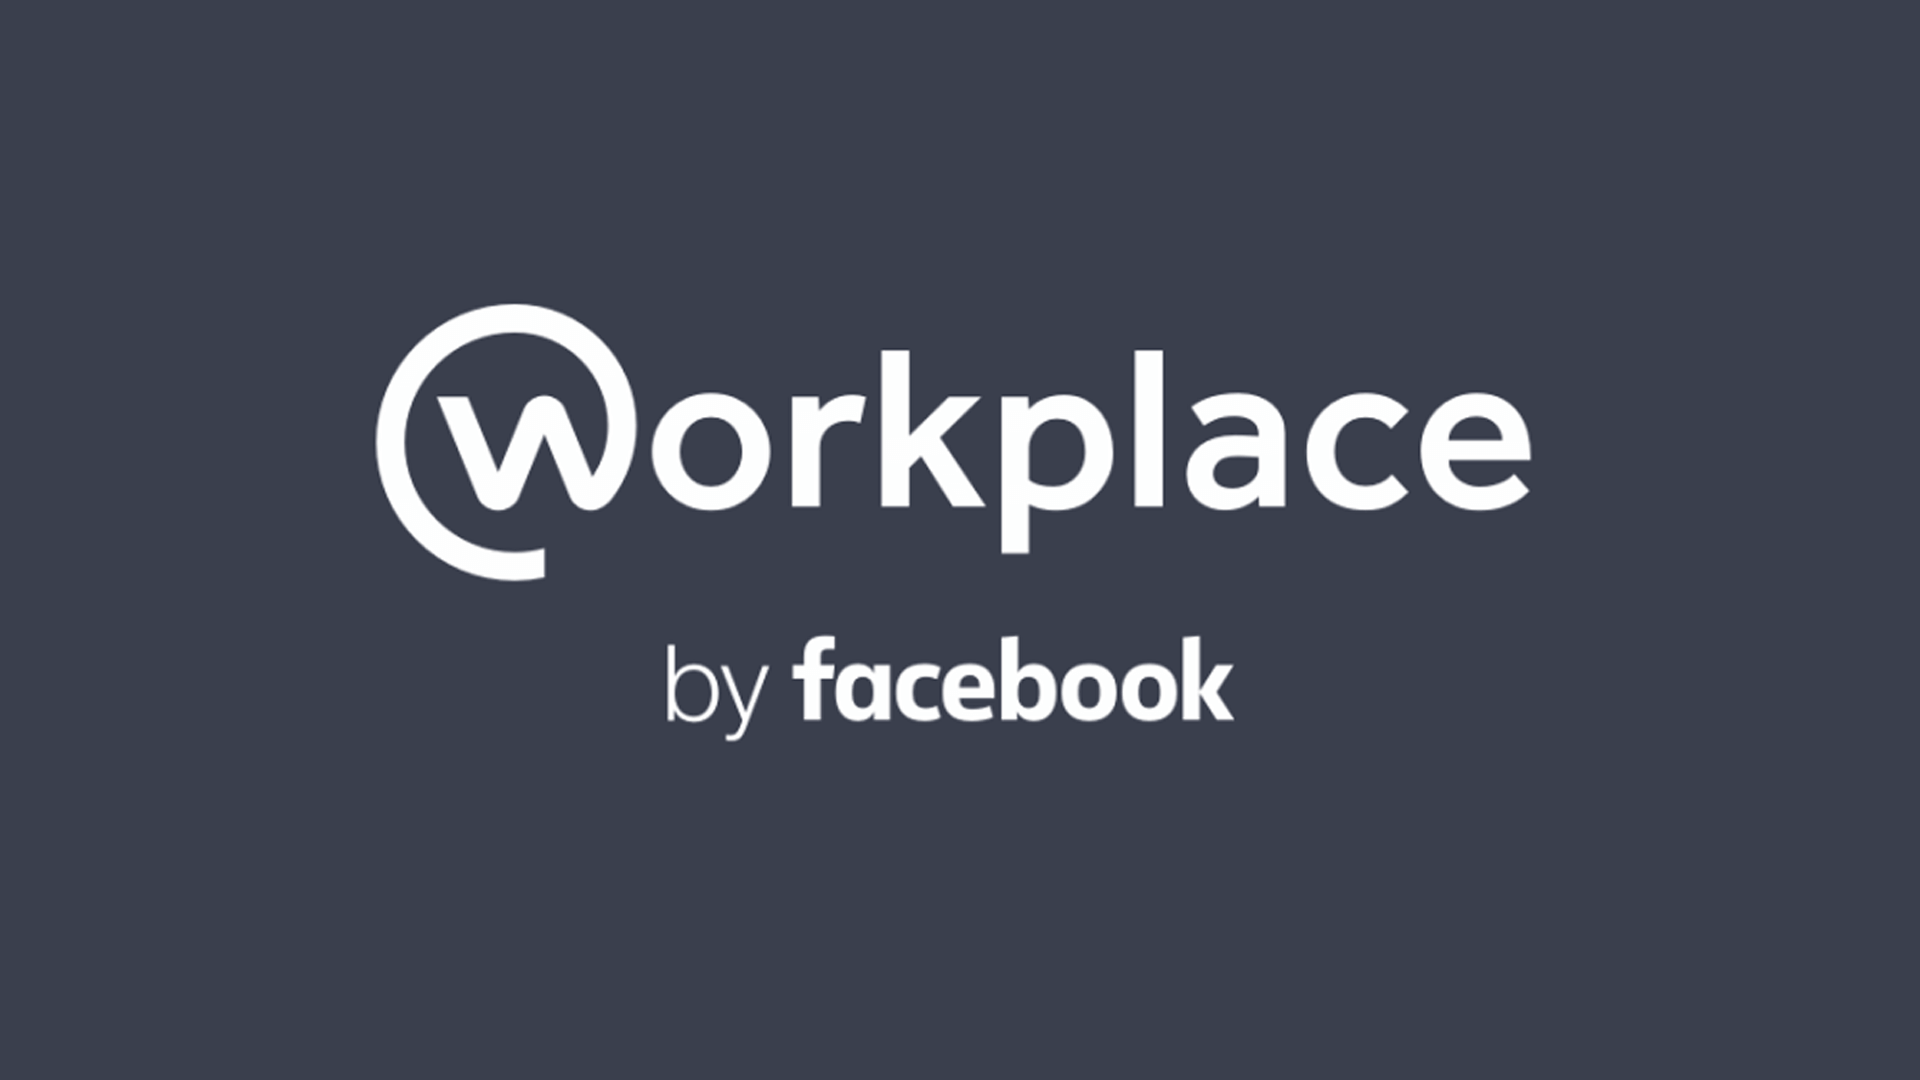 Facebook Workplace Logo - Workplace by Facebook opens to organizations across the globe ...